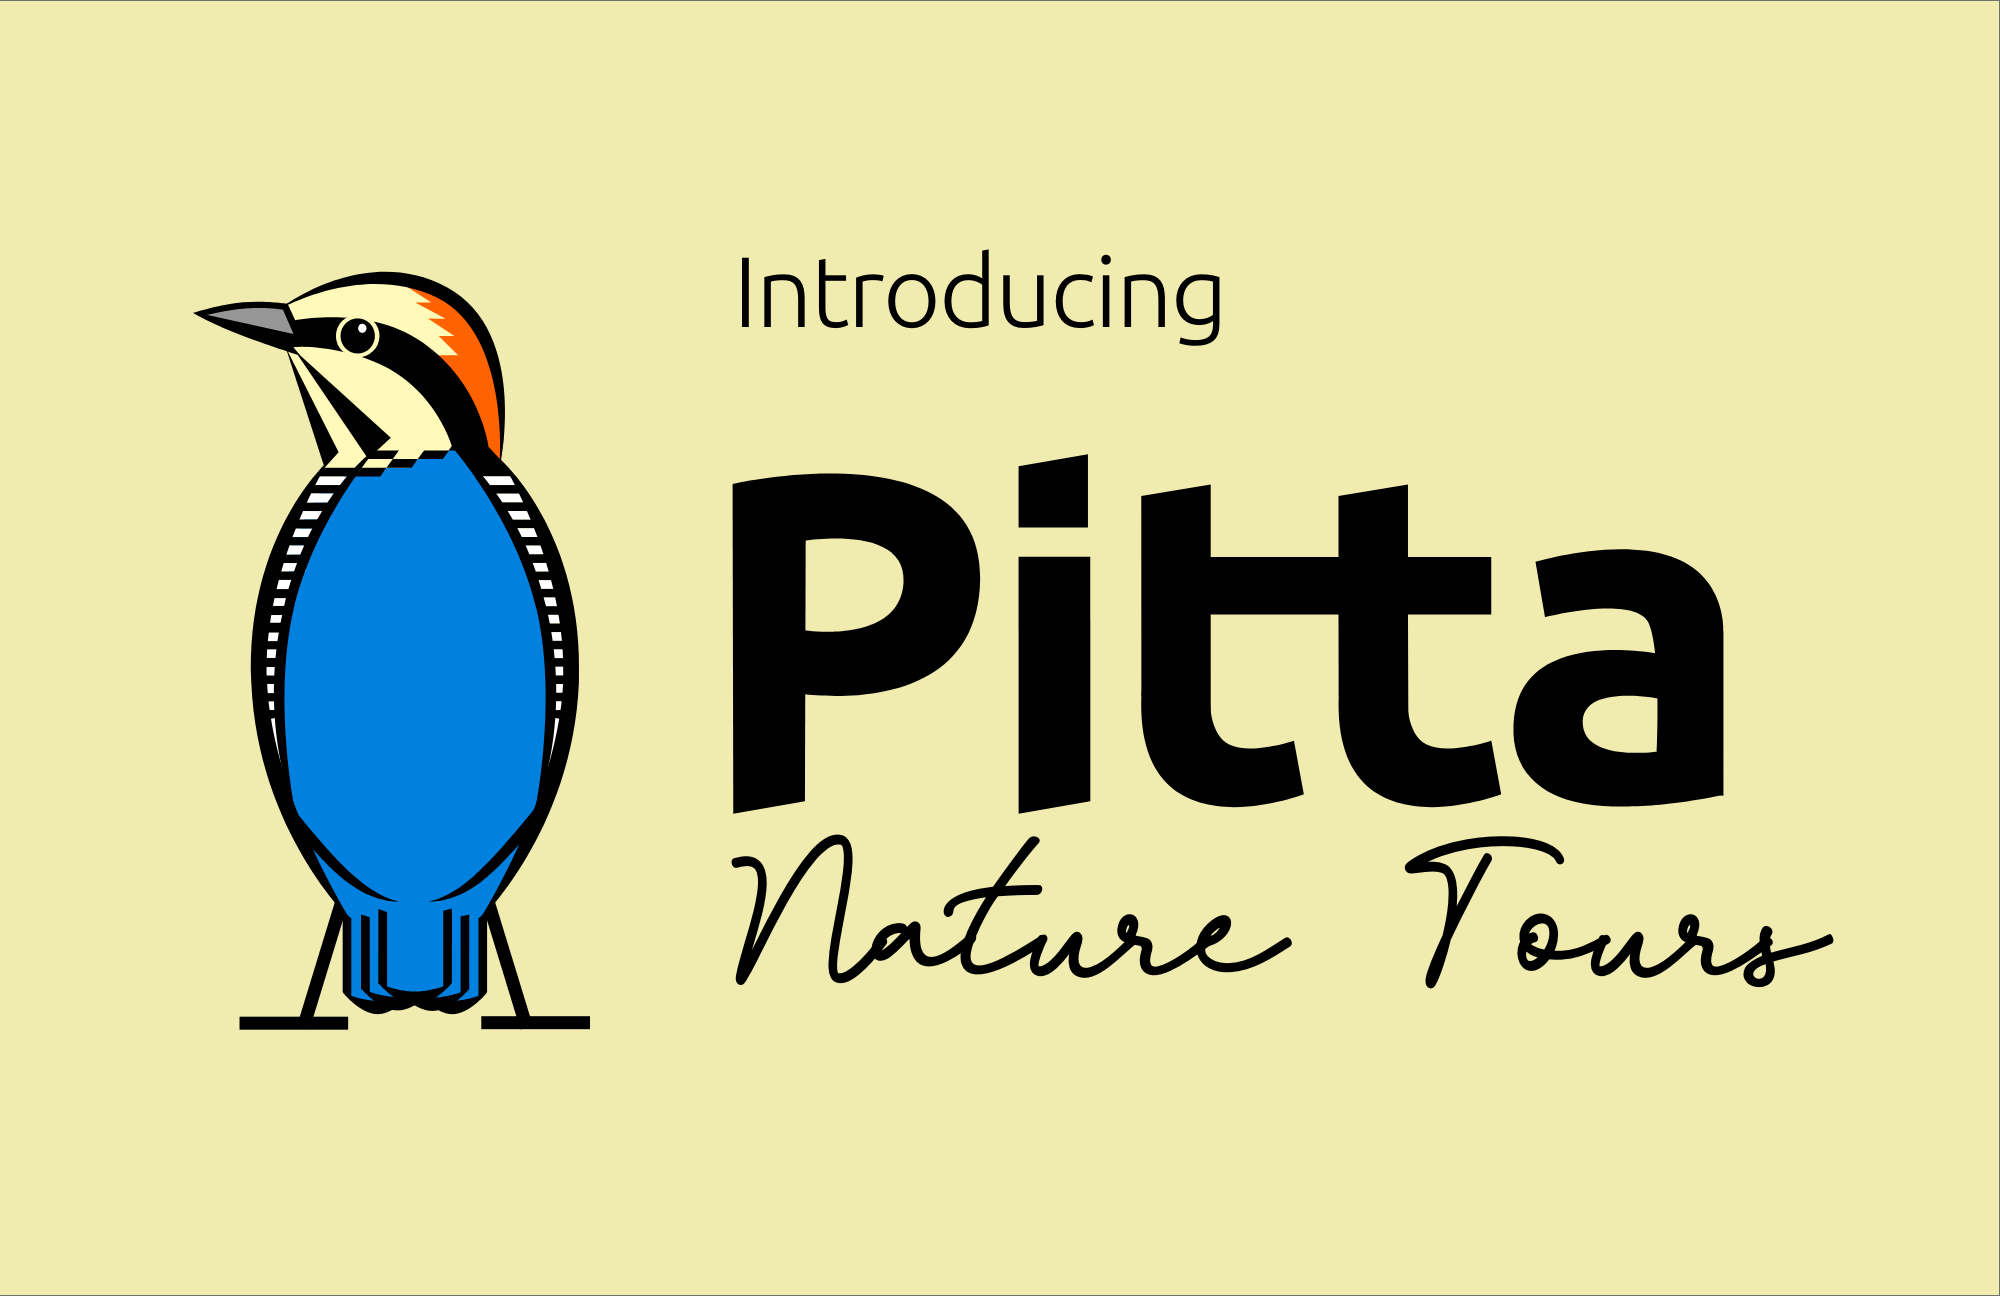 Mountain West Birding Company is now Pitta Tours